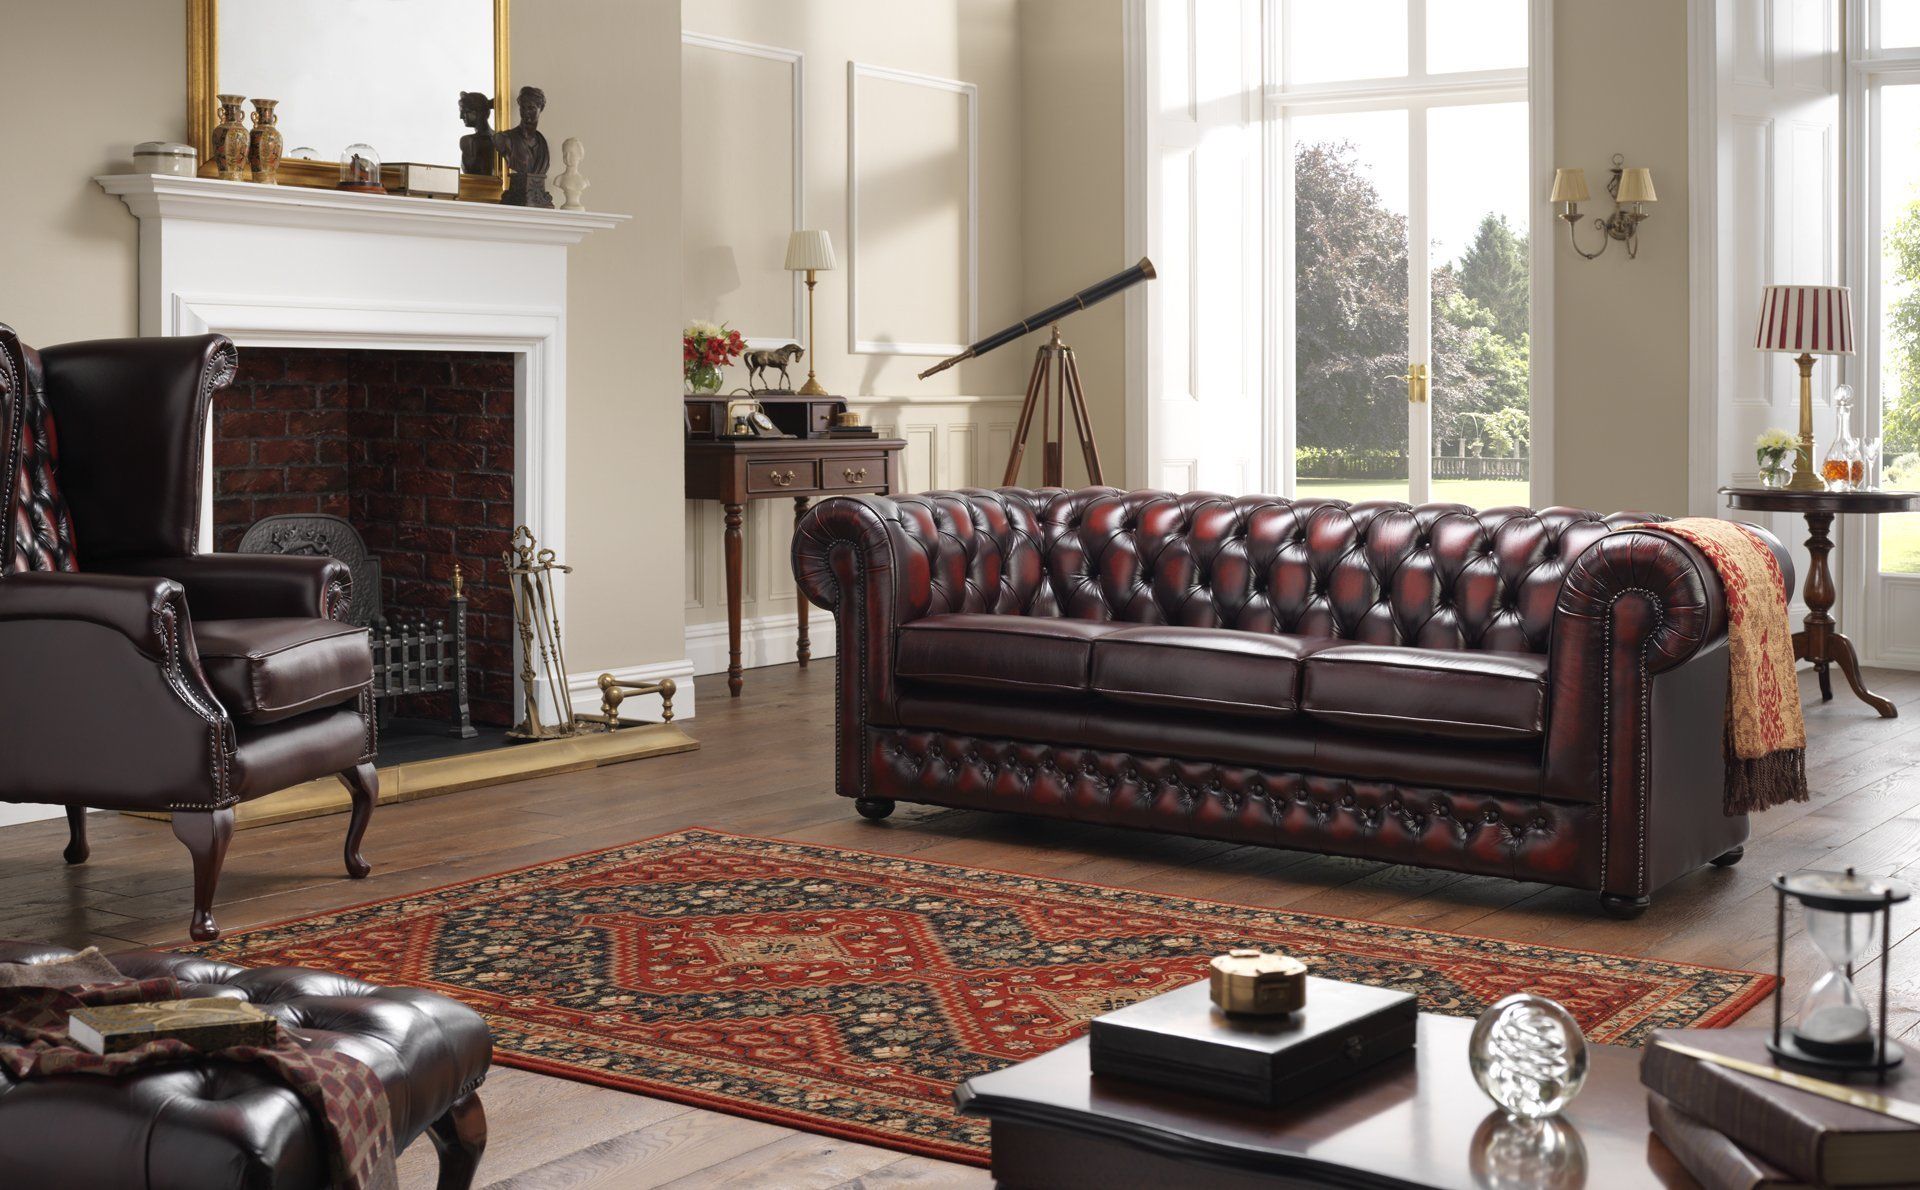 Chesterfield 3 Seater Leather Sofa In A Traditional Living Room Regarding Traditional 3 Seater Sofas (Gallery 8 of 20)